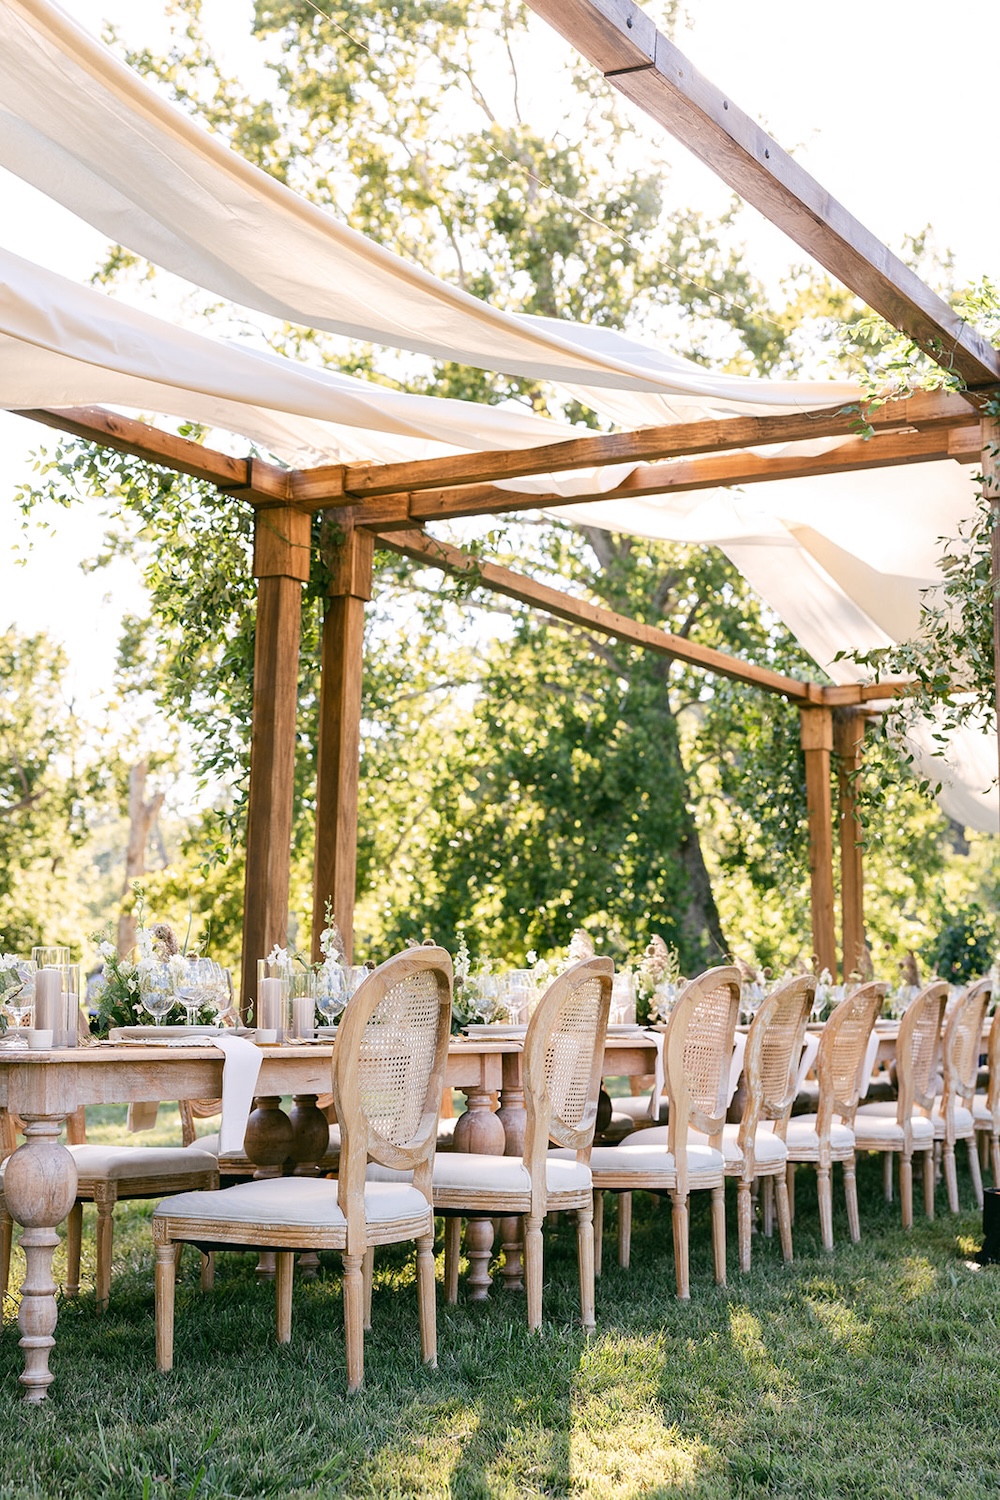 Rattan dining chairs, farmhouse style tables for alfresco tented dinner. Milestone birthday party celebration weekend in Middleburg, Virginia. Sarah Bradshaw Photography.